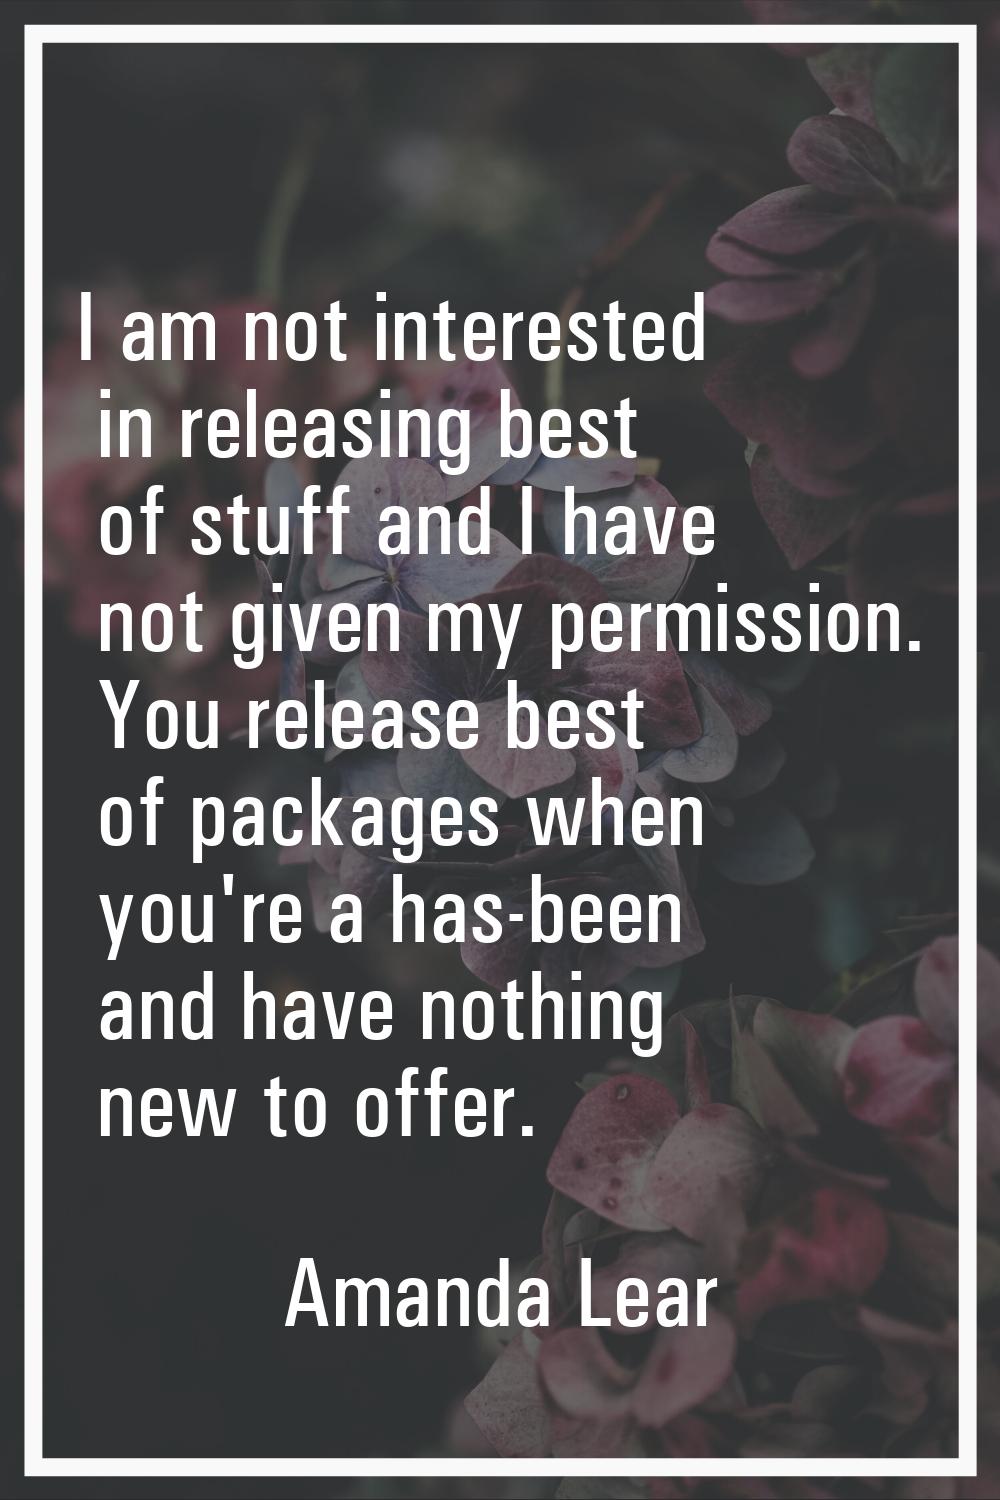 I am not interested in releasing best of stuff and I have not given my permission. You release best